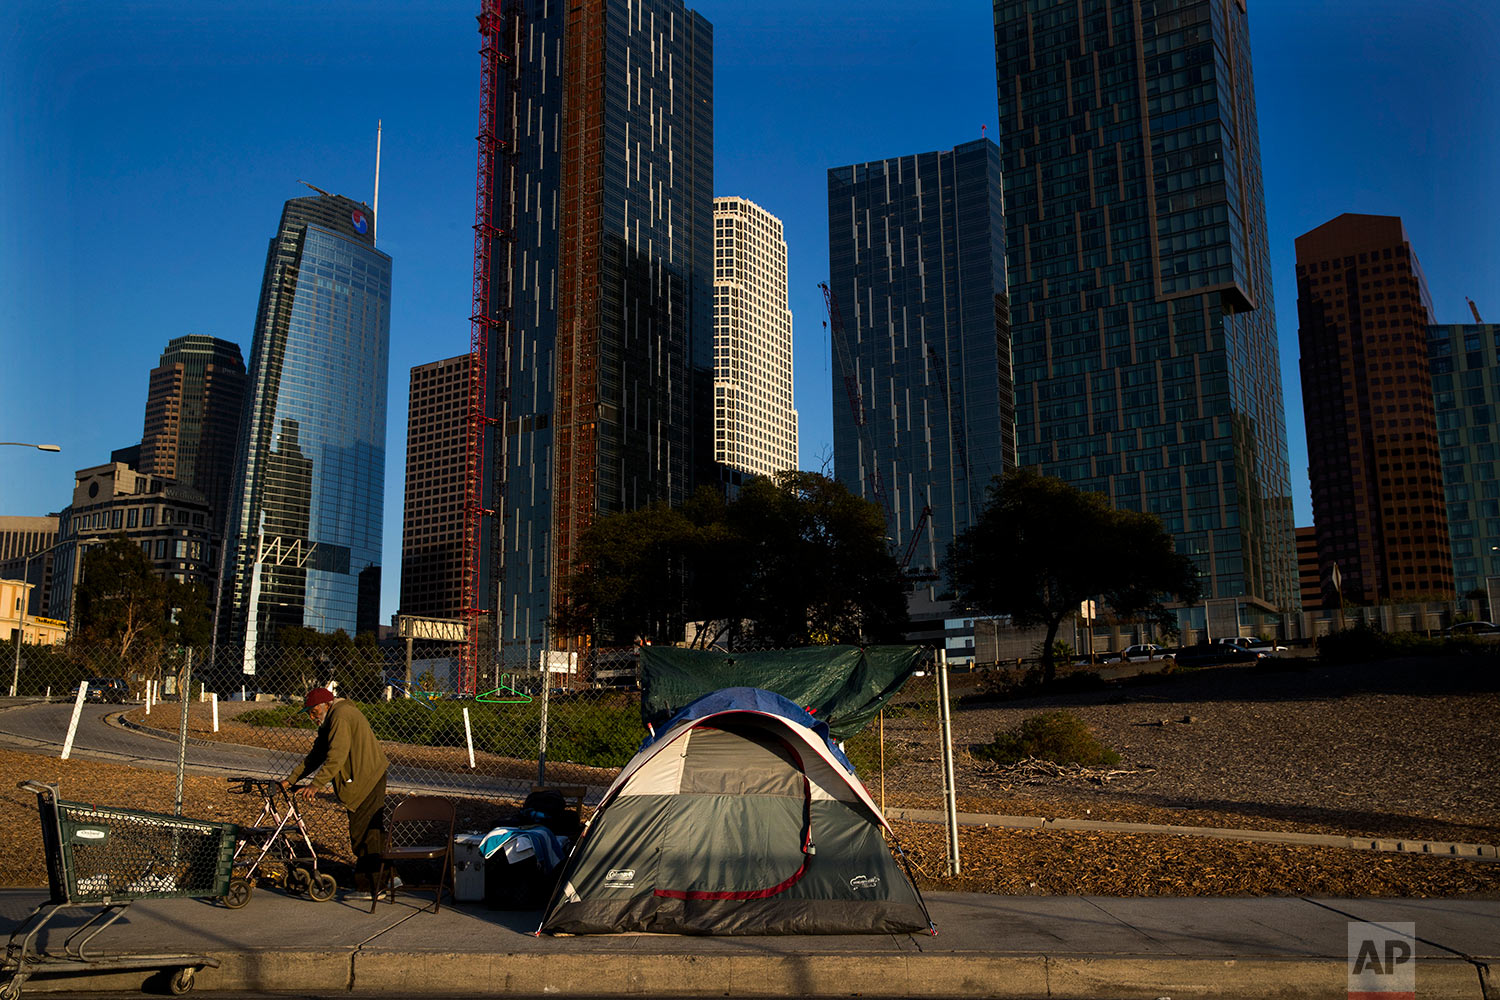  A homeless man, who declined to give his name, is dwarfed by skyscrapers Monday, Dec. 4, 2017, in Los Angeles. The U.S. Department on Housing and Urban Development release of the 2017 homeless numbers are expected to show a dramatic increase in the 